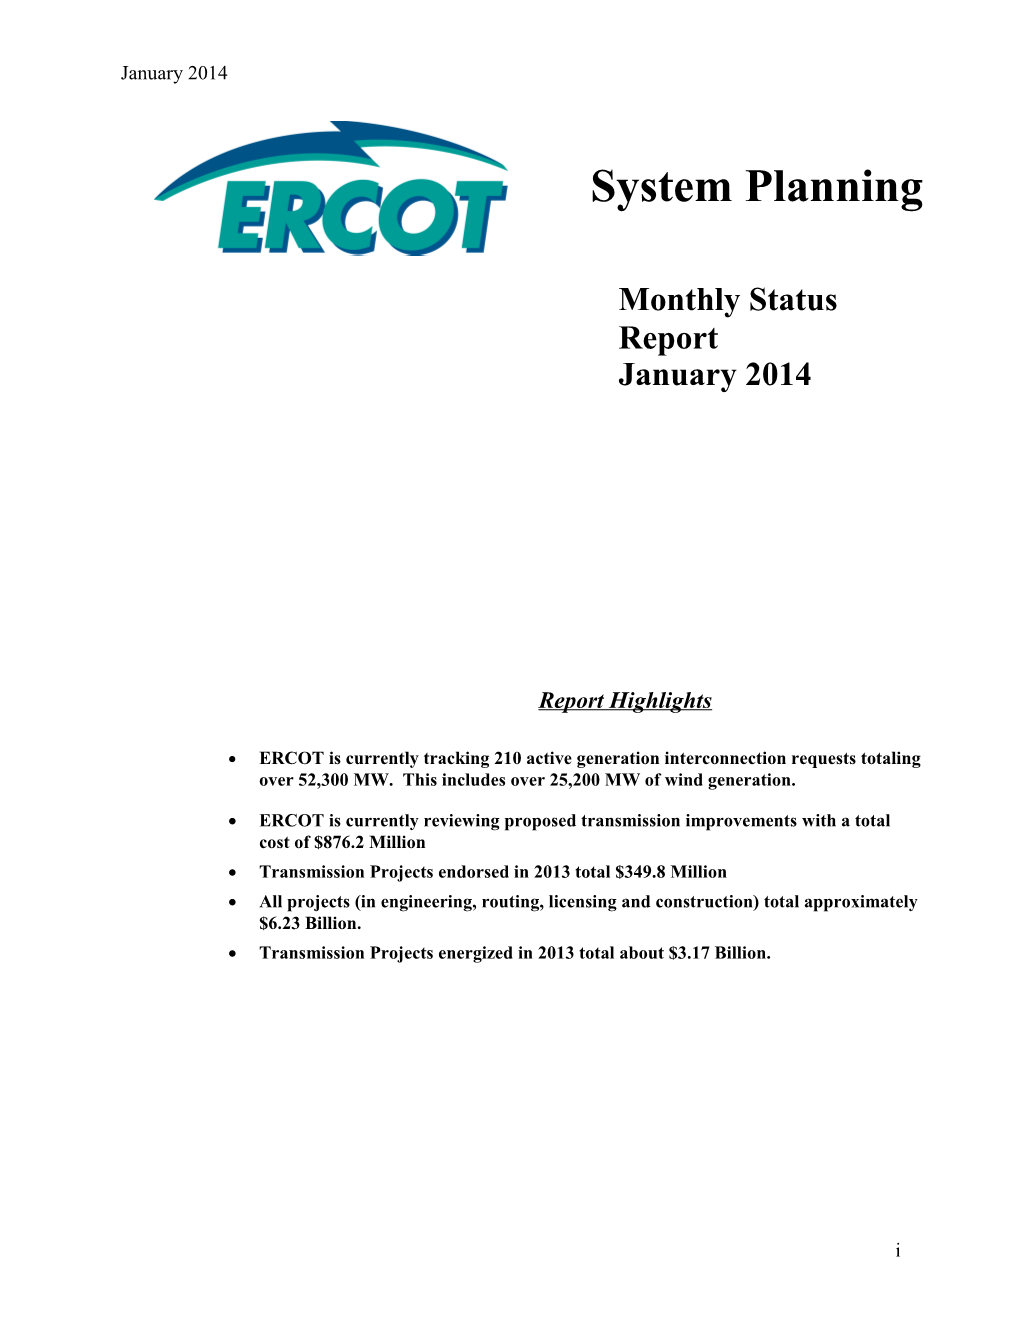 ERCOT Is Currently Reviewing Proposed Transmission Improvements with a Total Cost of $876.2